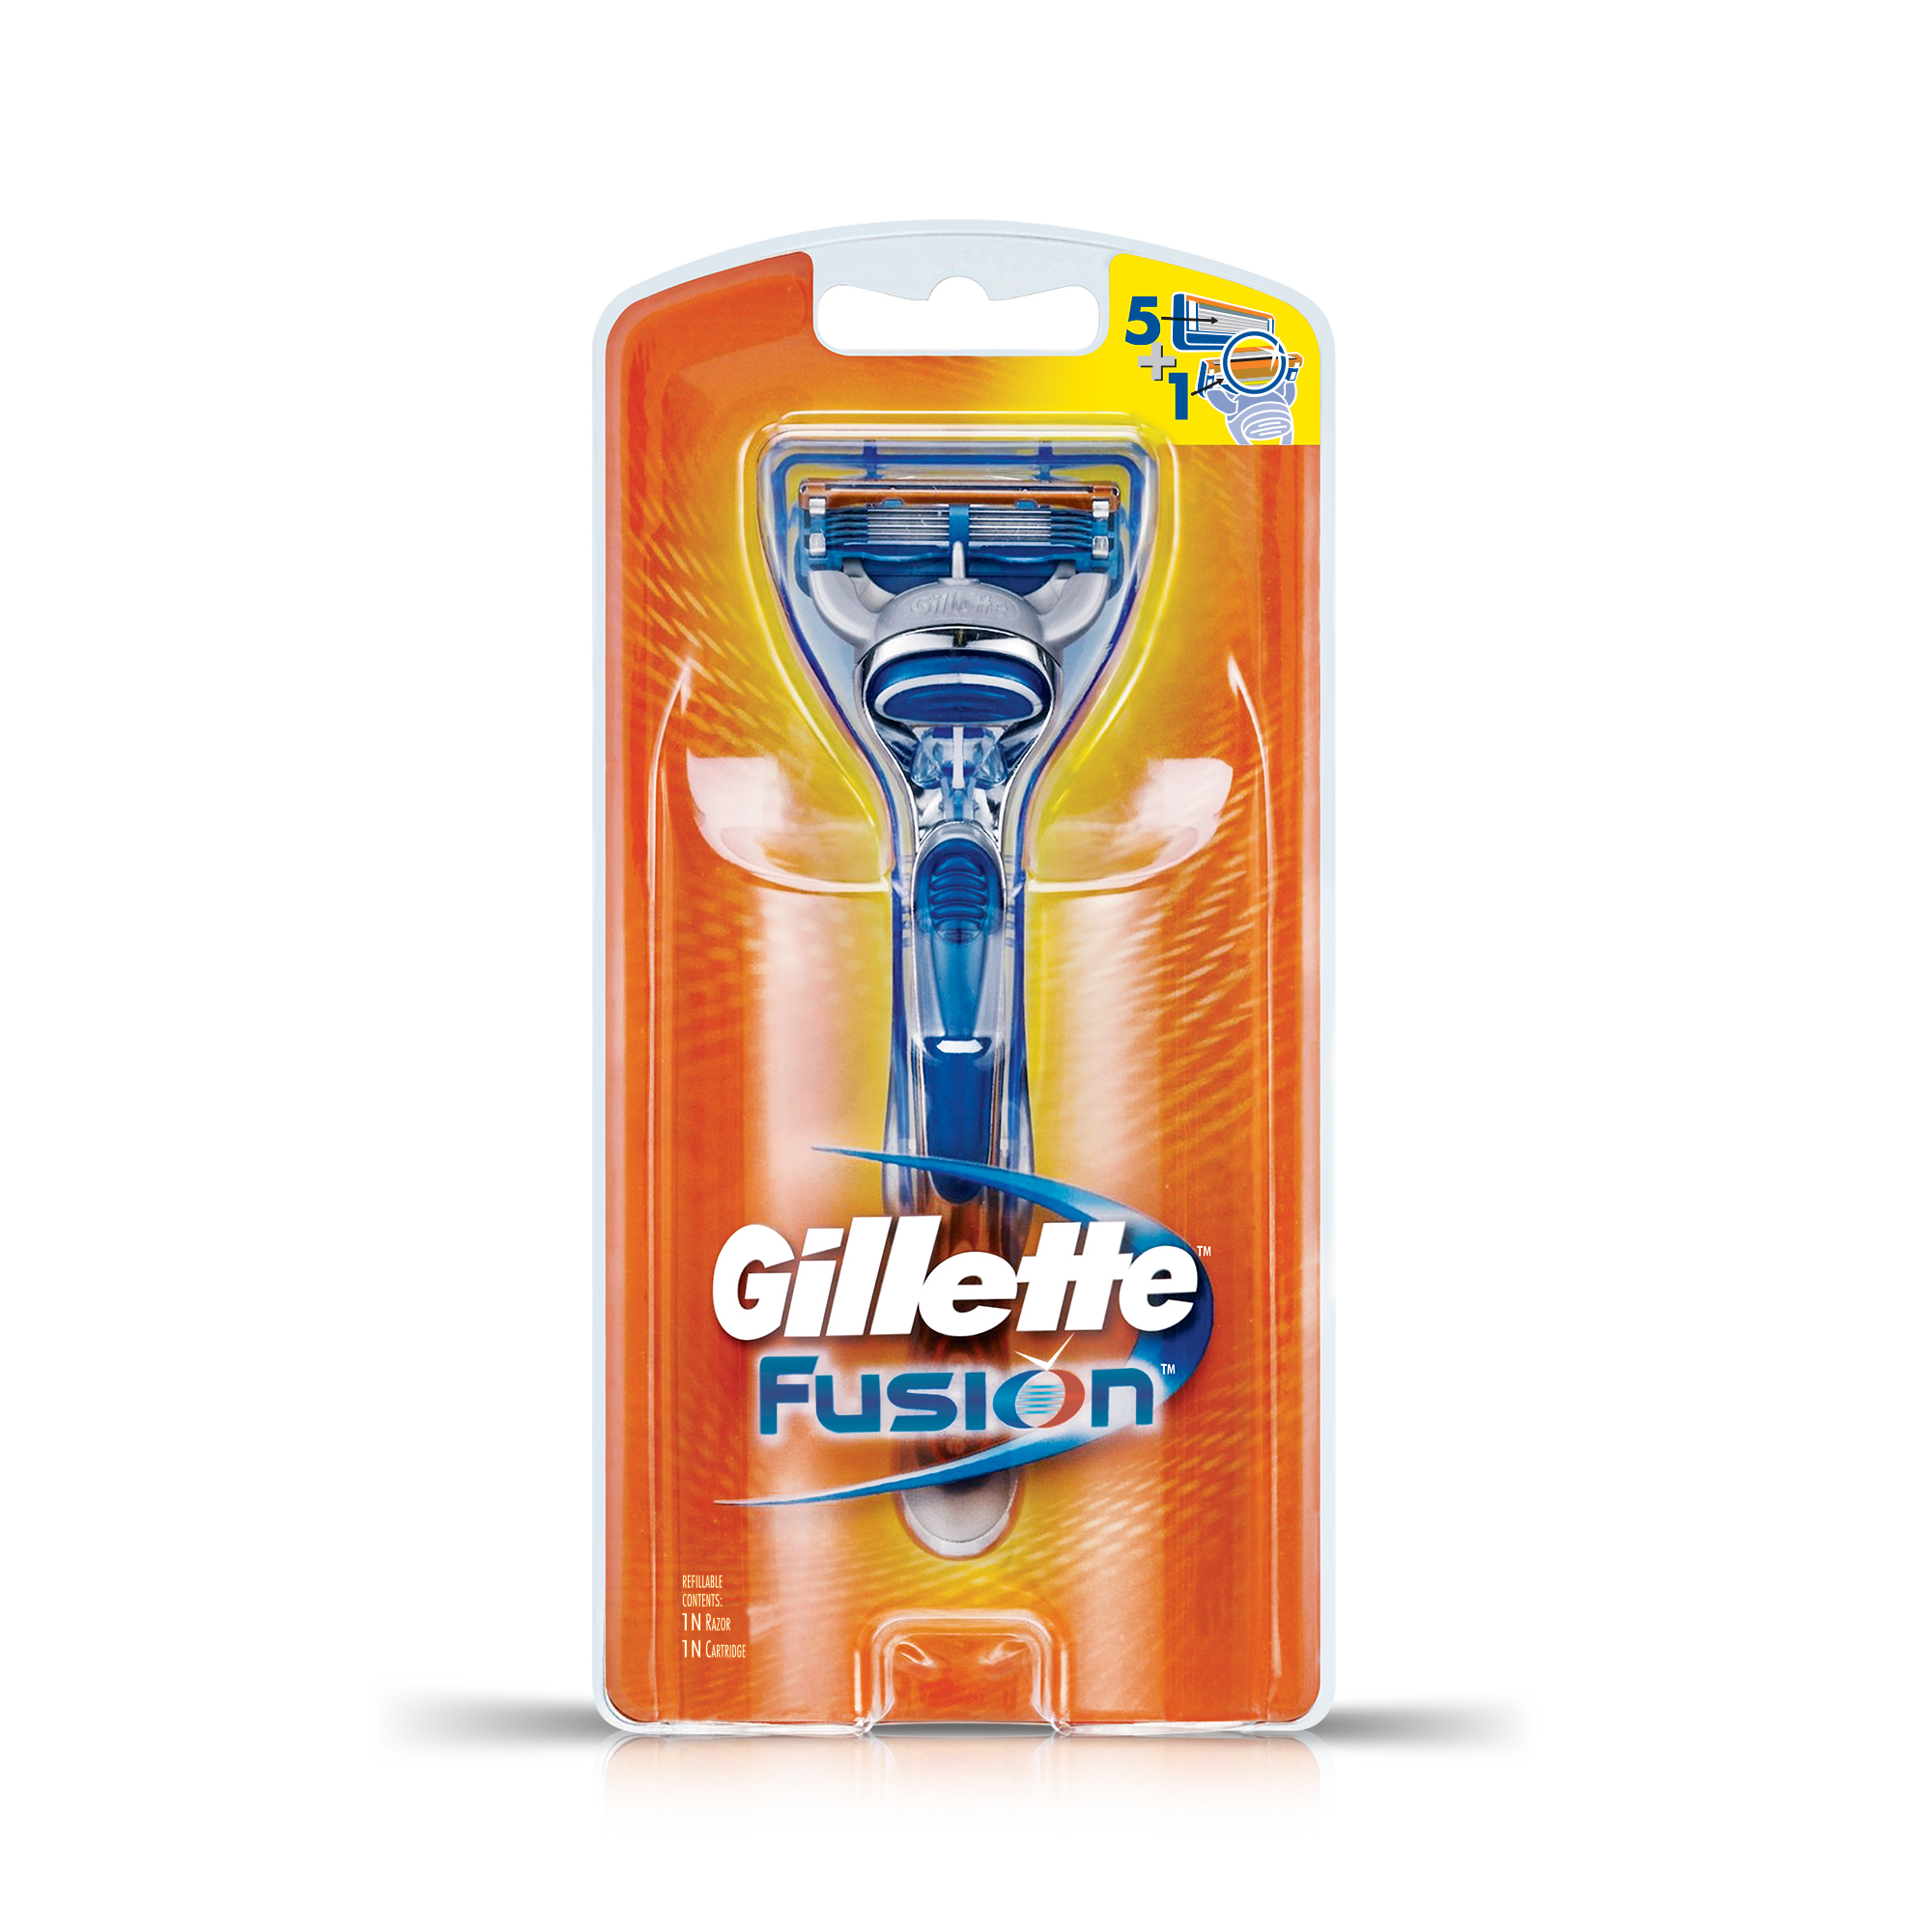 Gillette Fusion Razor Shaving Congratulations Gift Pack for Men with 4 Cartridge